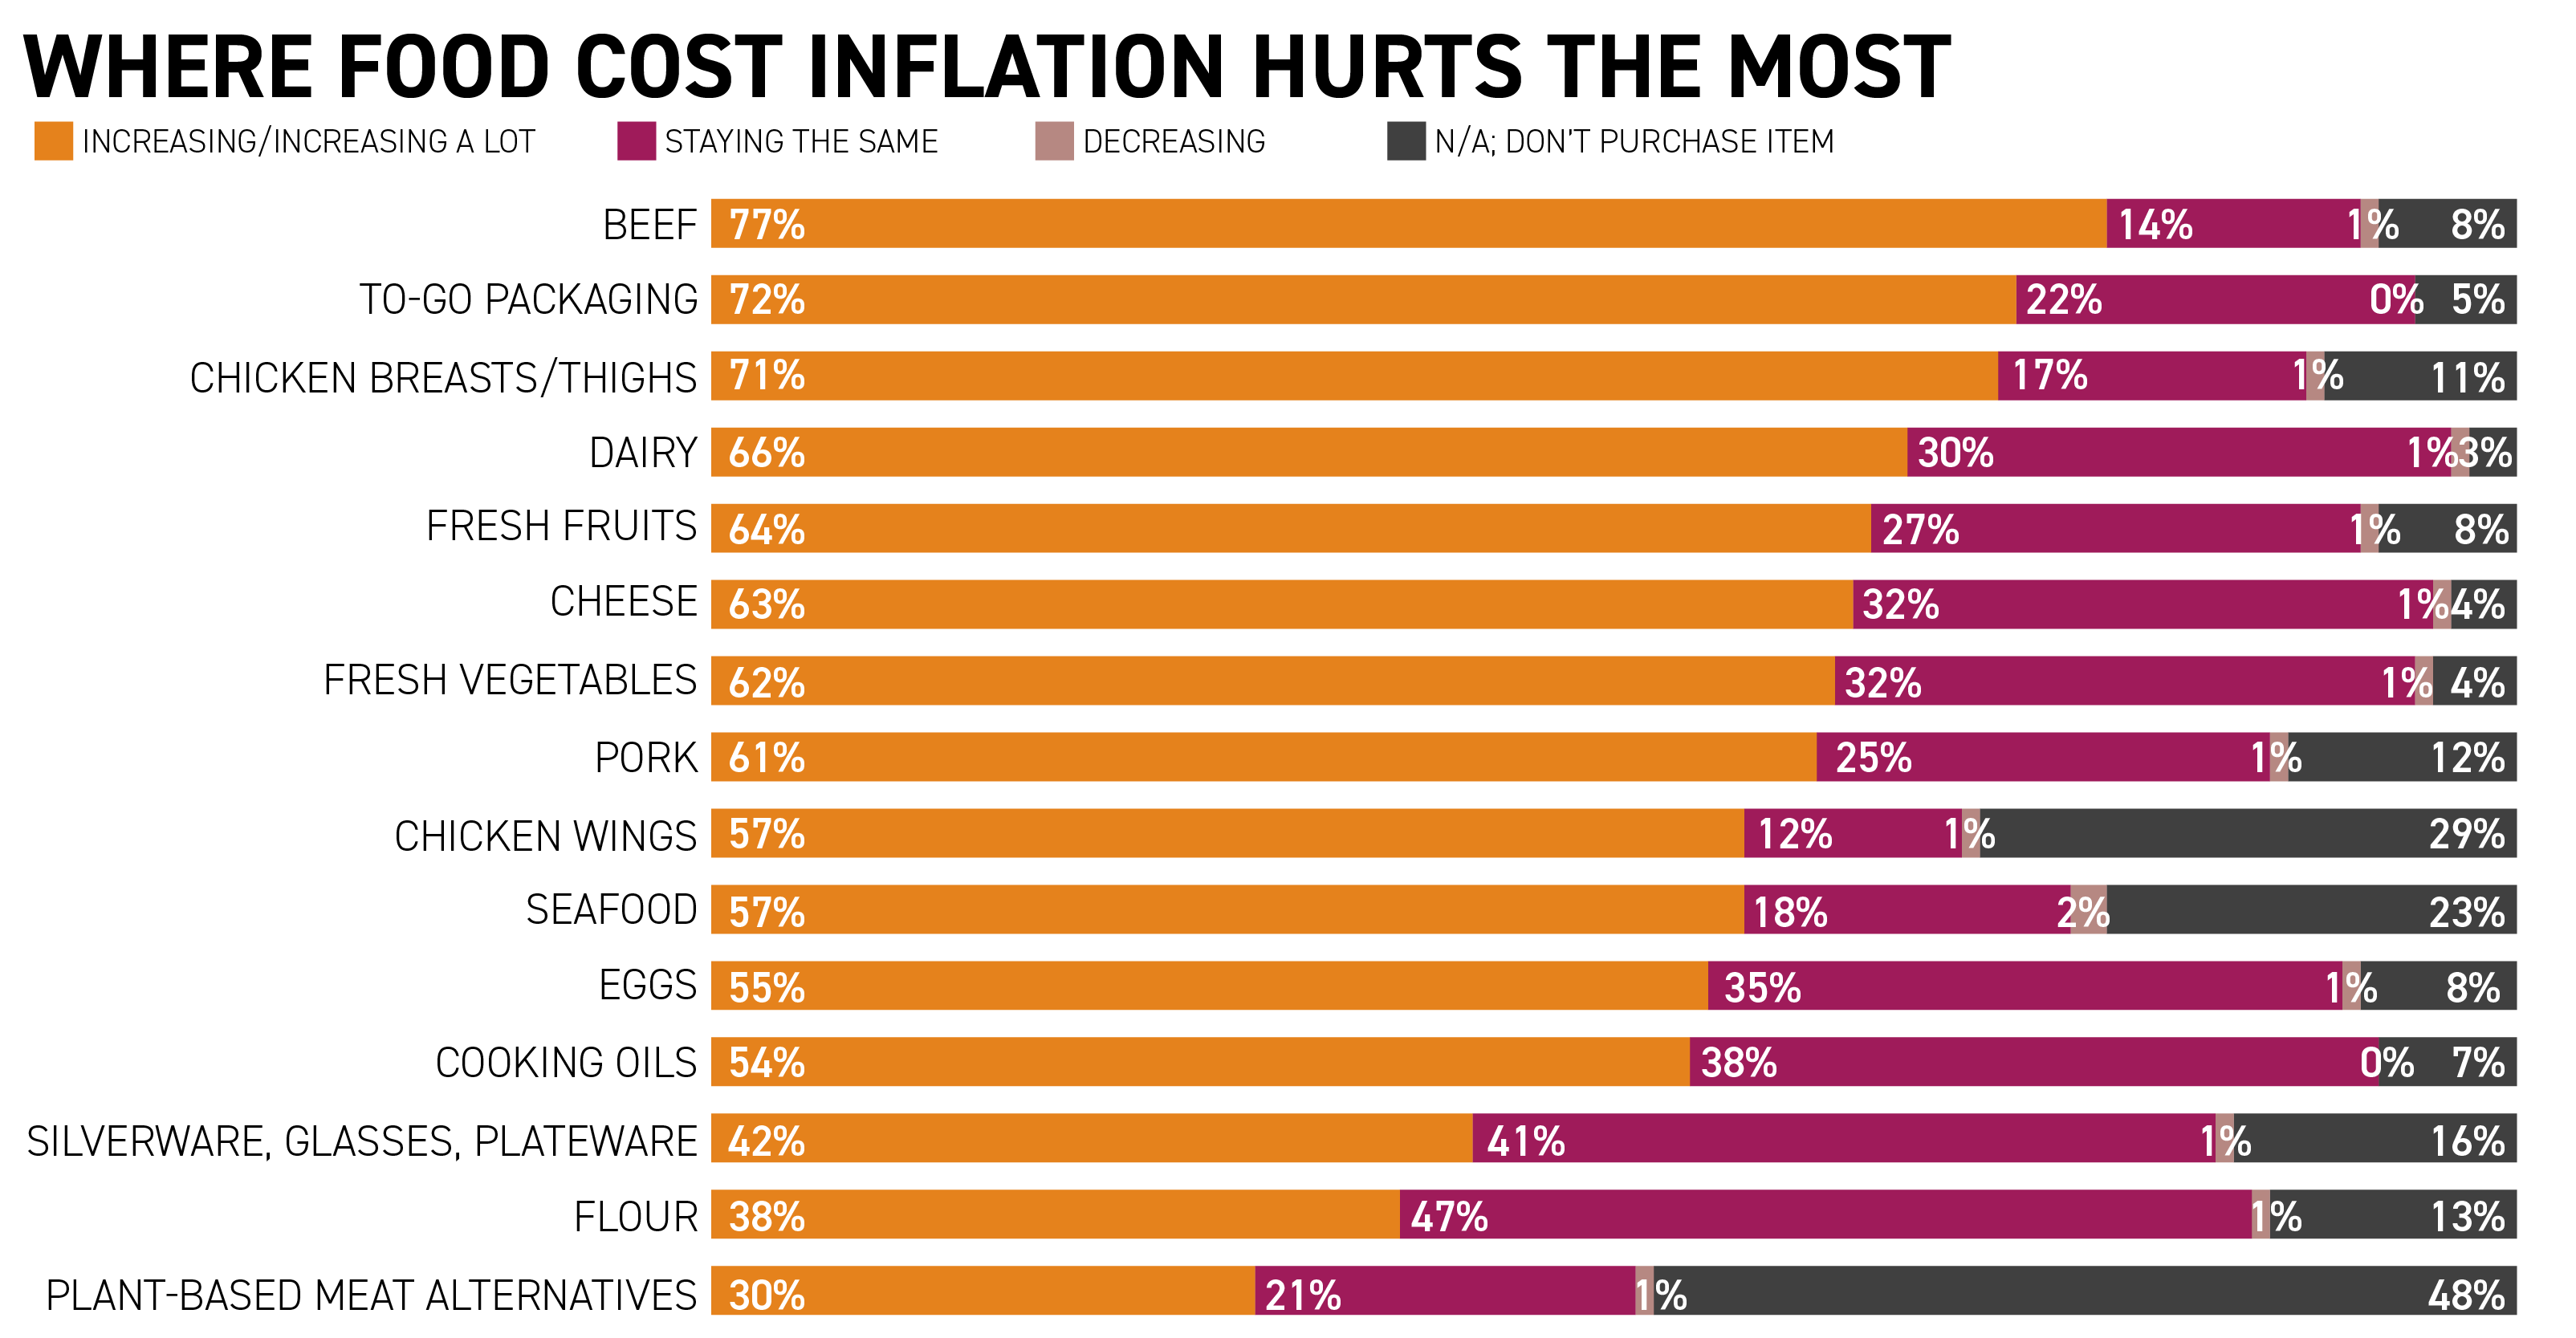 where-food-cost-inflation-hurts-the-most-01.png